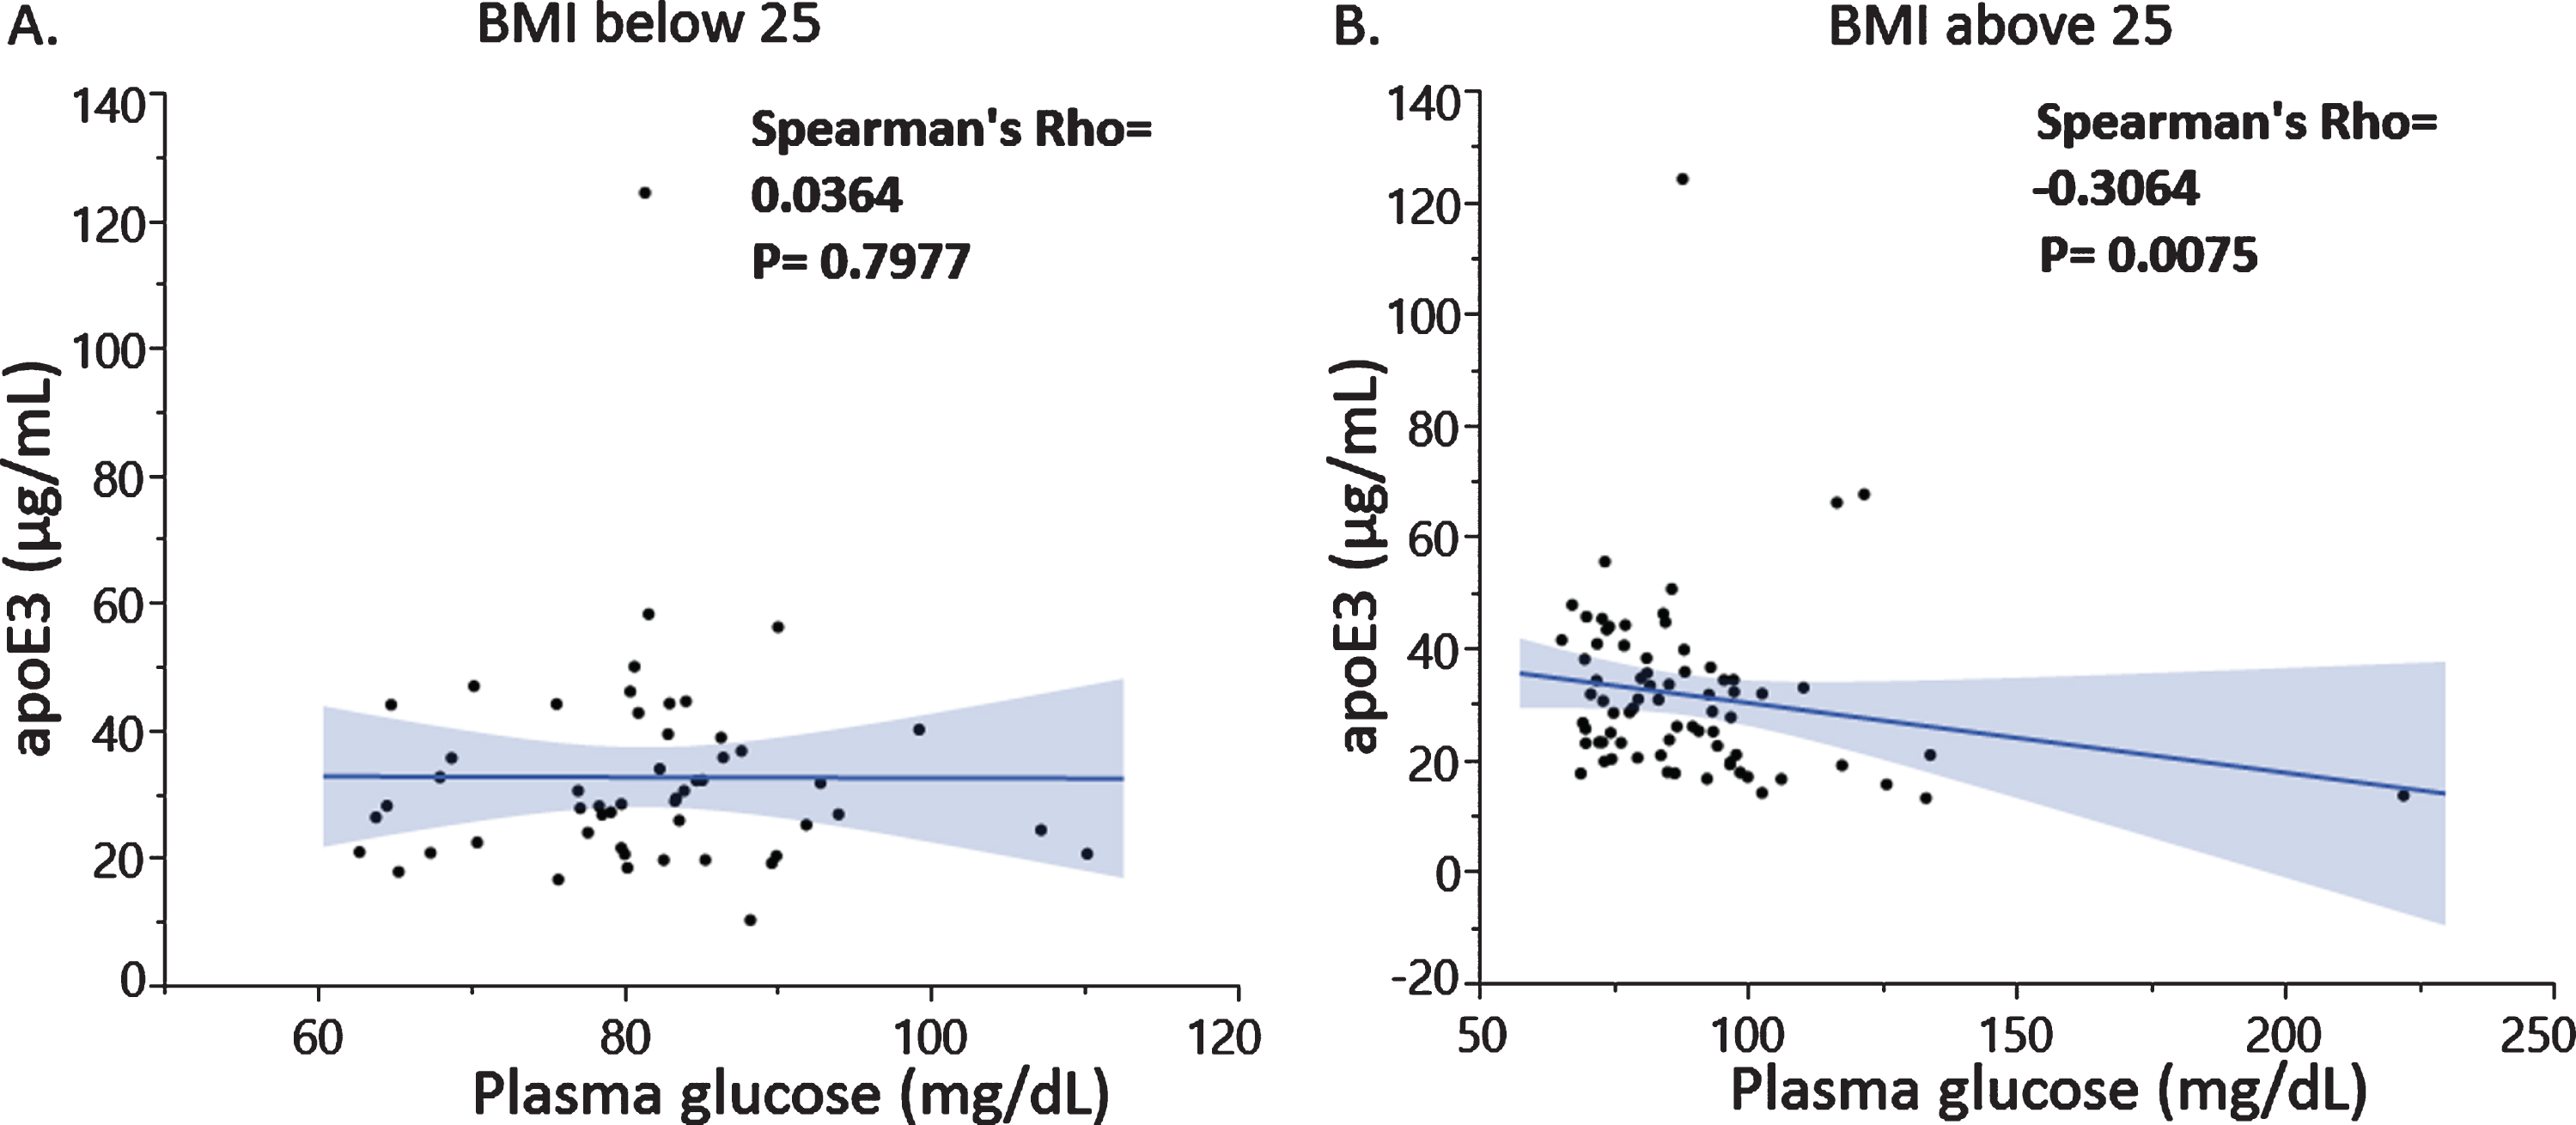 Associations between plasma apoE3 and plasma glucose levels in subjects with BMI below 25 (A) and above 25 (B).